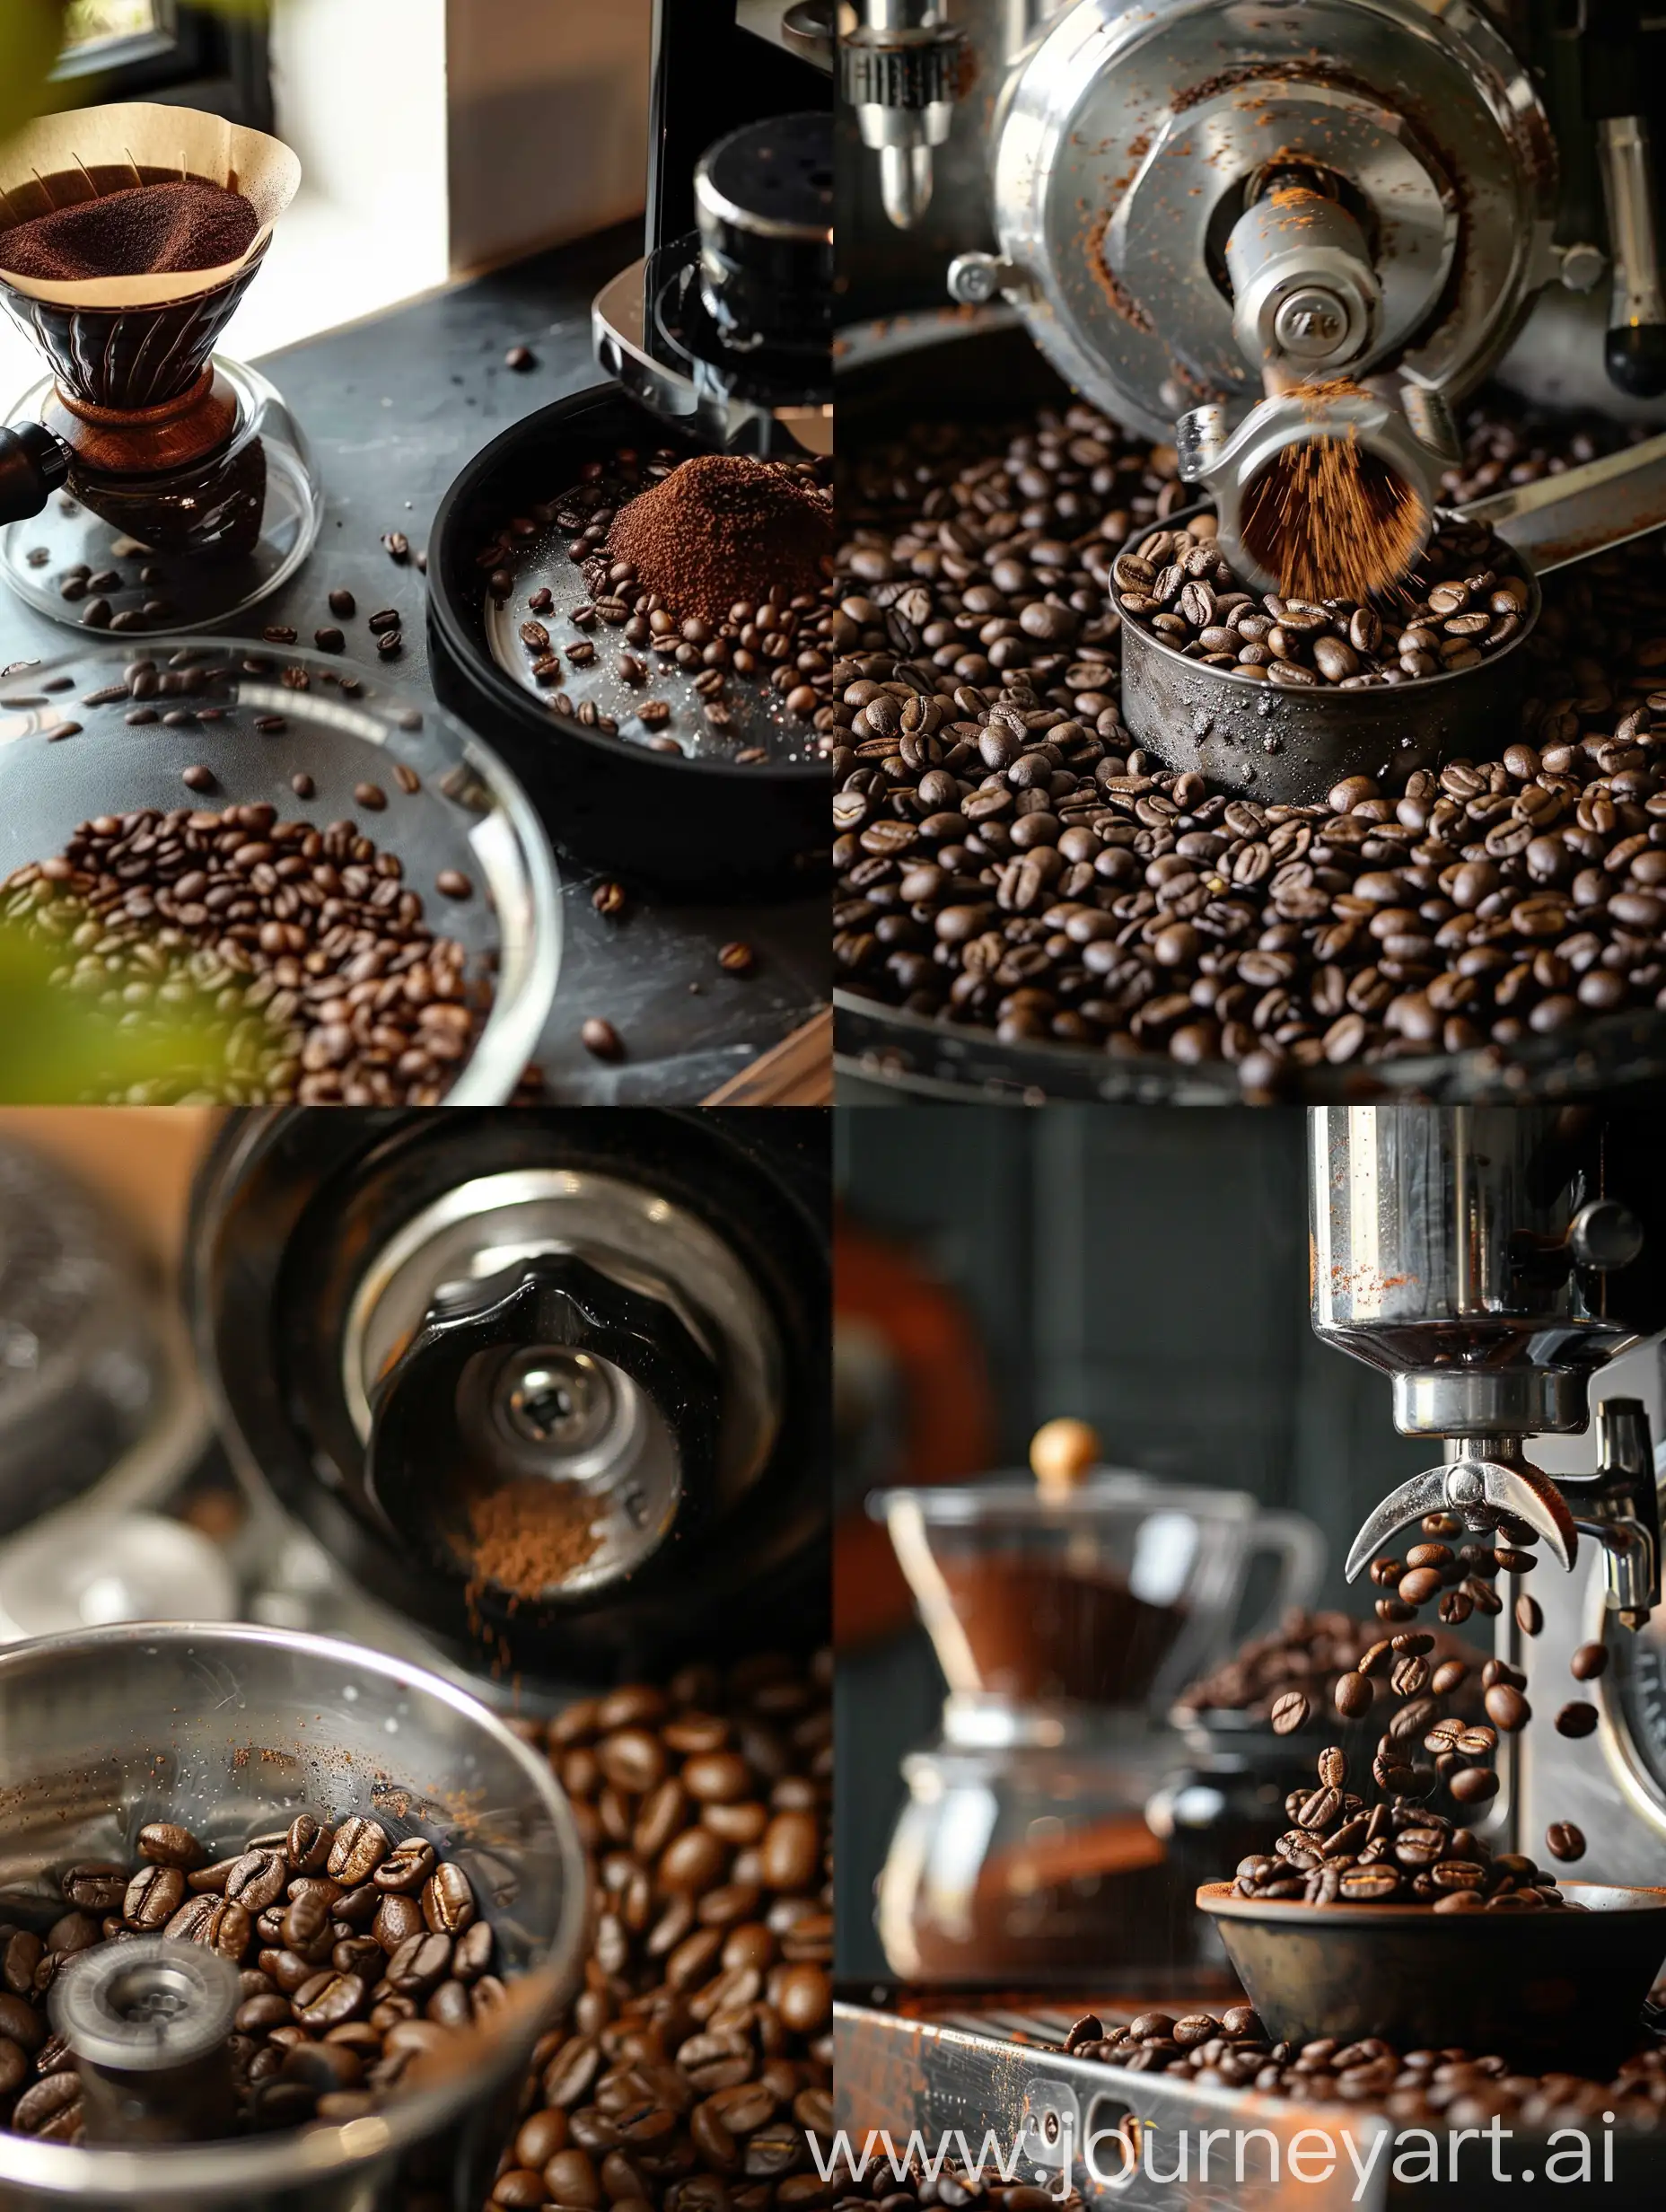 Artisanal-Coffee-Roasting-and-Grinding-Process